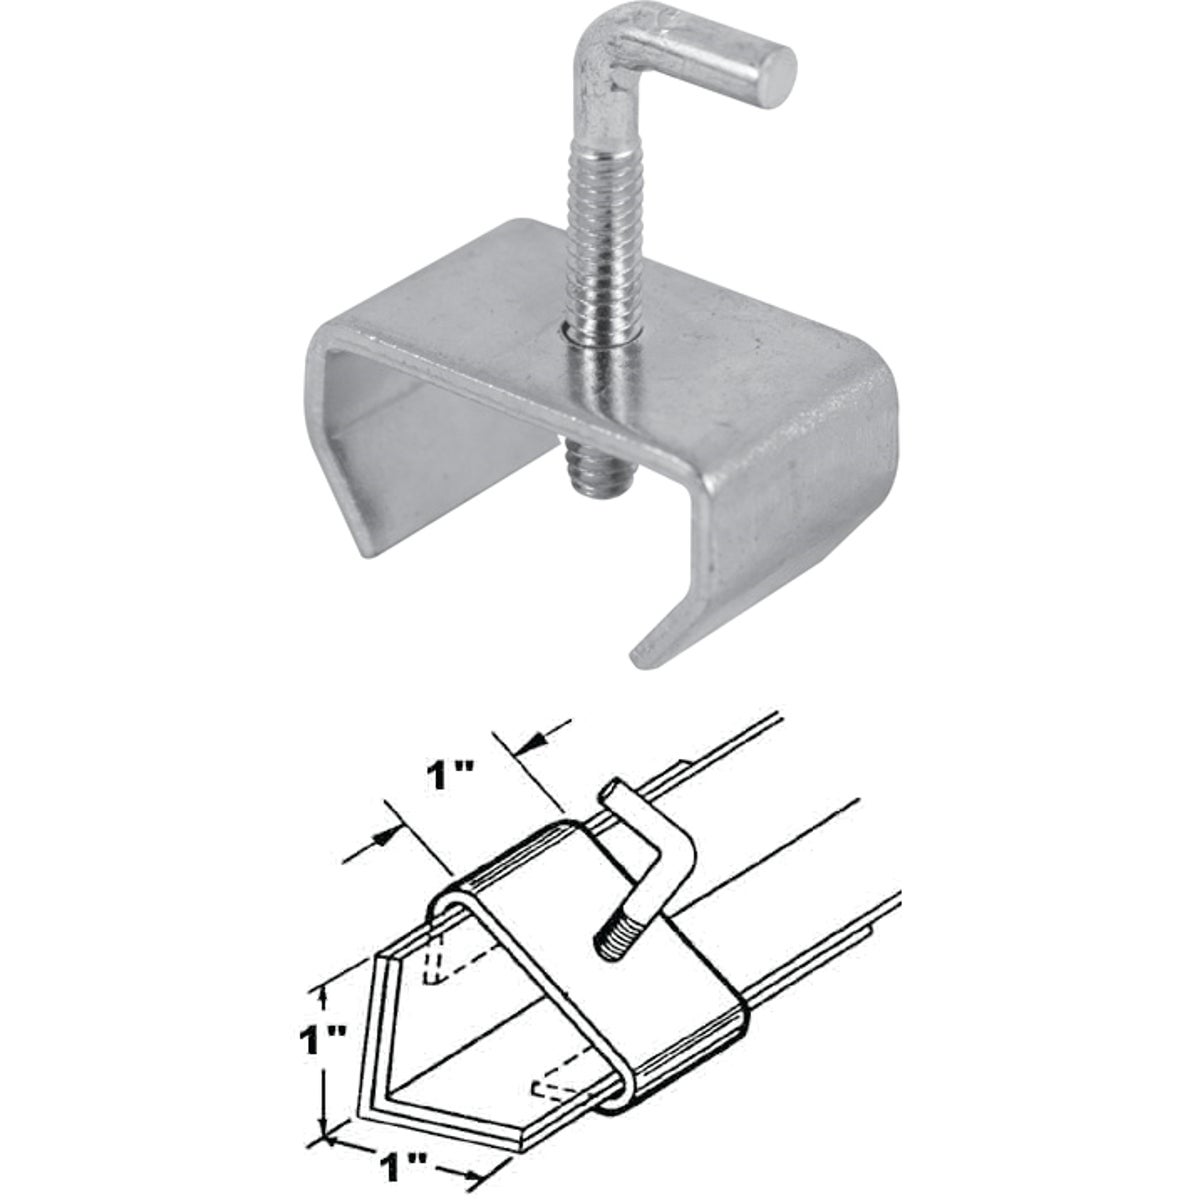 1" BED FRAME RAIL CLAMP